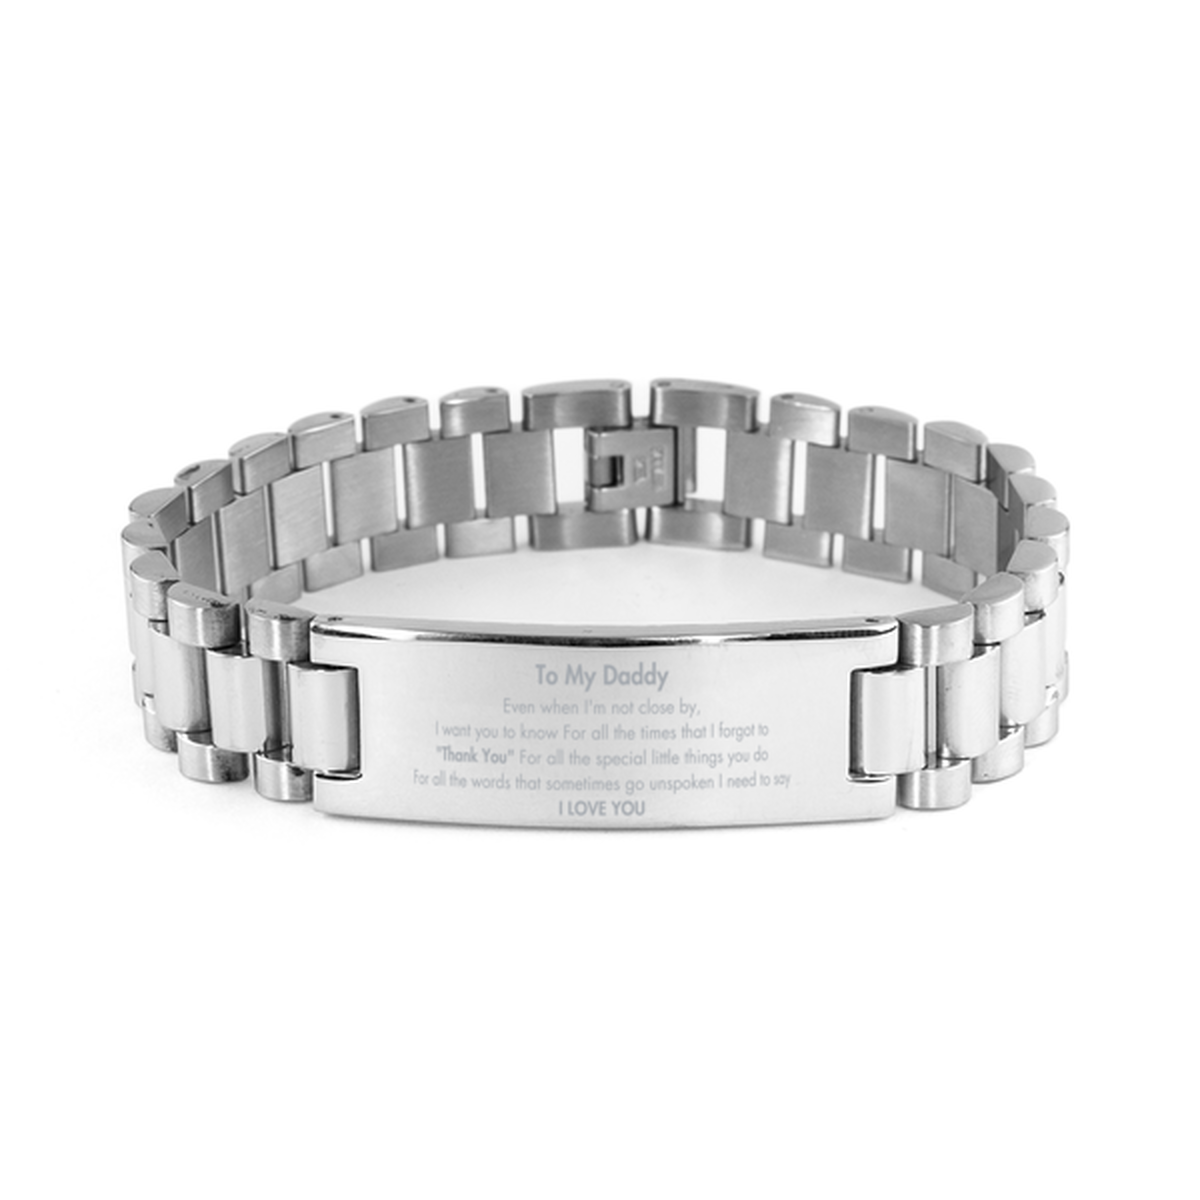 Thank You Gifts for Daddy, Keepsake Ladder Stainless Steel Bracelet Gifts for Daddy Birthday Mother's day Father's Day Daddy For all the words That sometimes go unspoken I need to say I LOVE YOU